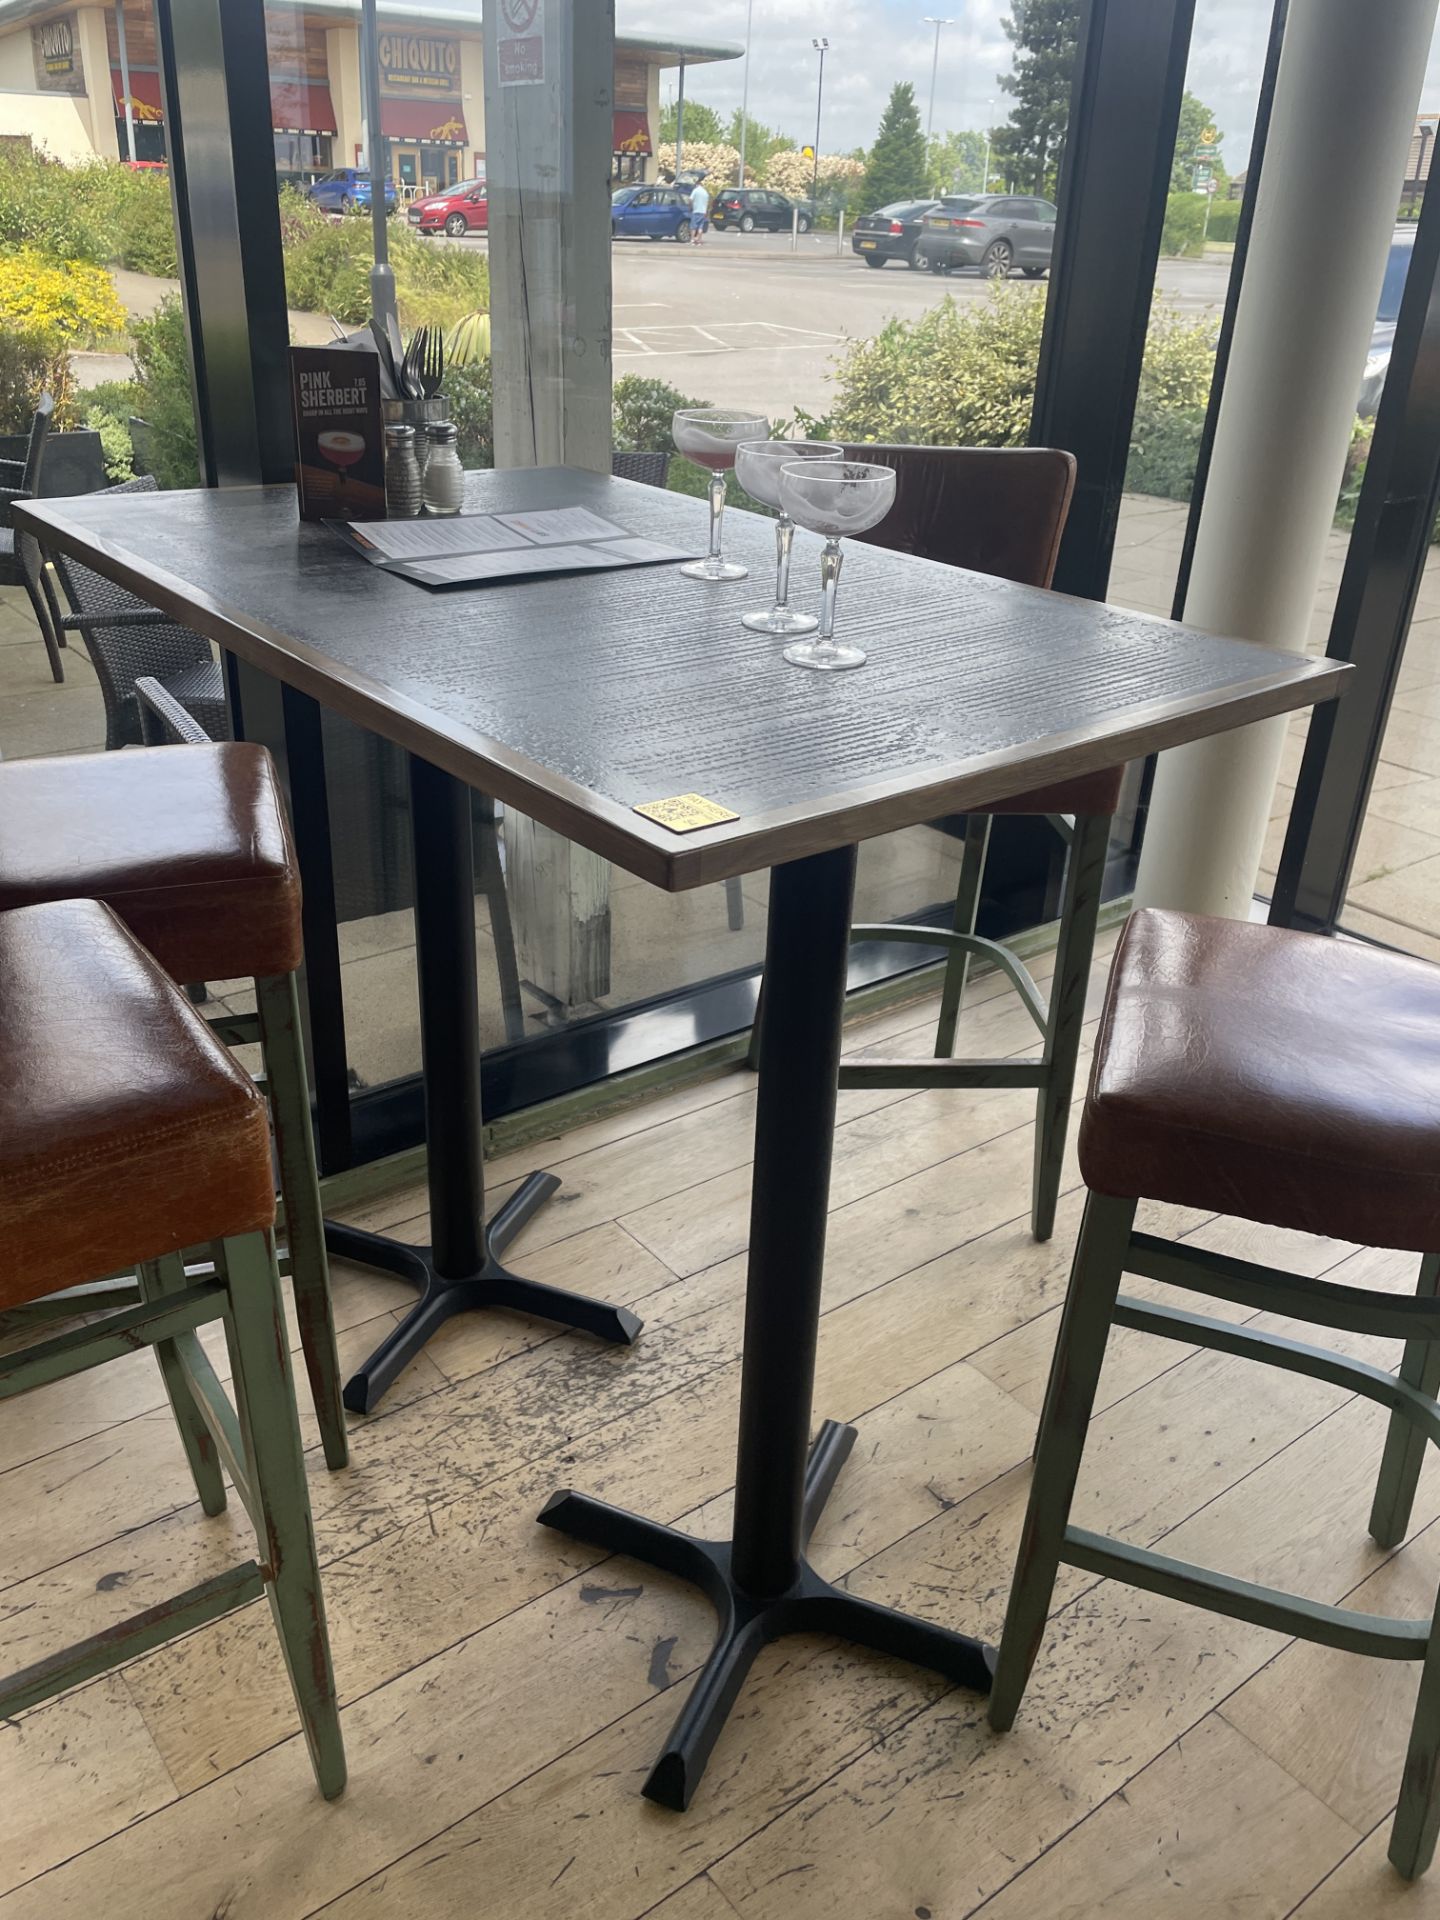 1 x Rectangular Poser Restaurant Table With Cast Iron Base and Inlaid Wooden Top - Image 2 of 6